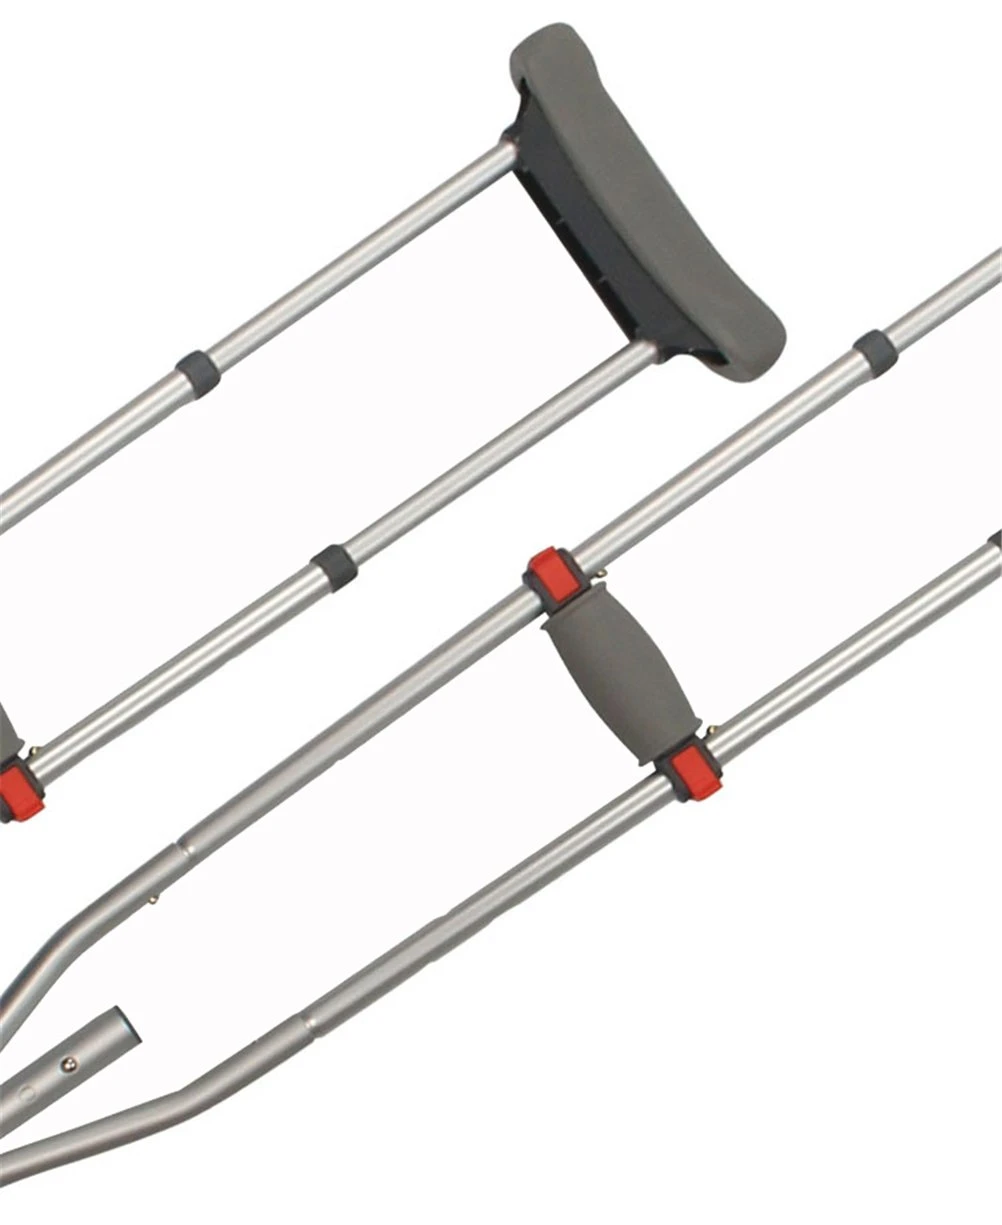 Lightweight Foldable Under Arm Crutches for Elderly